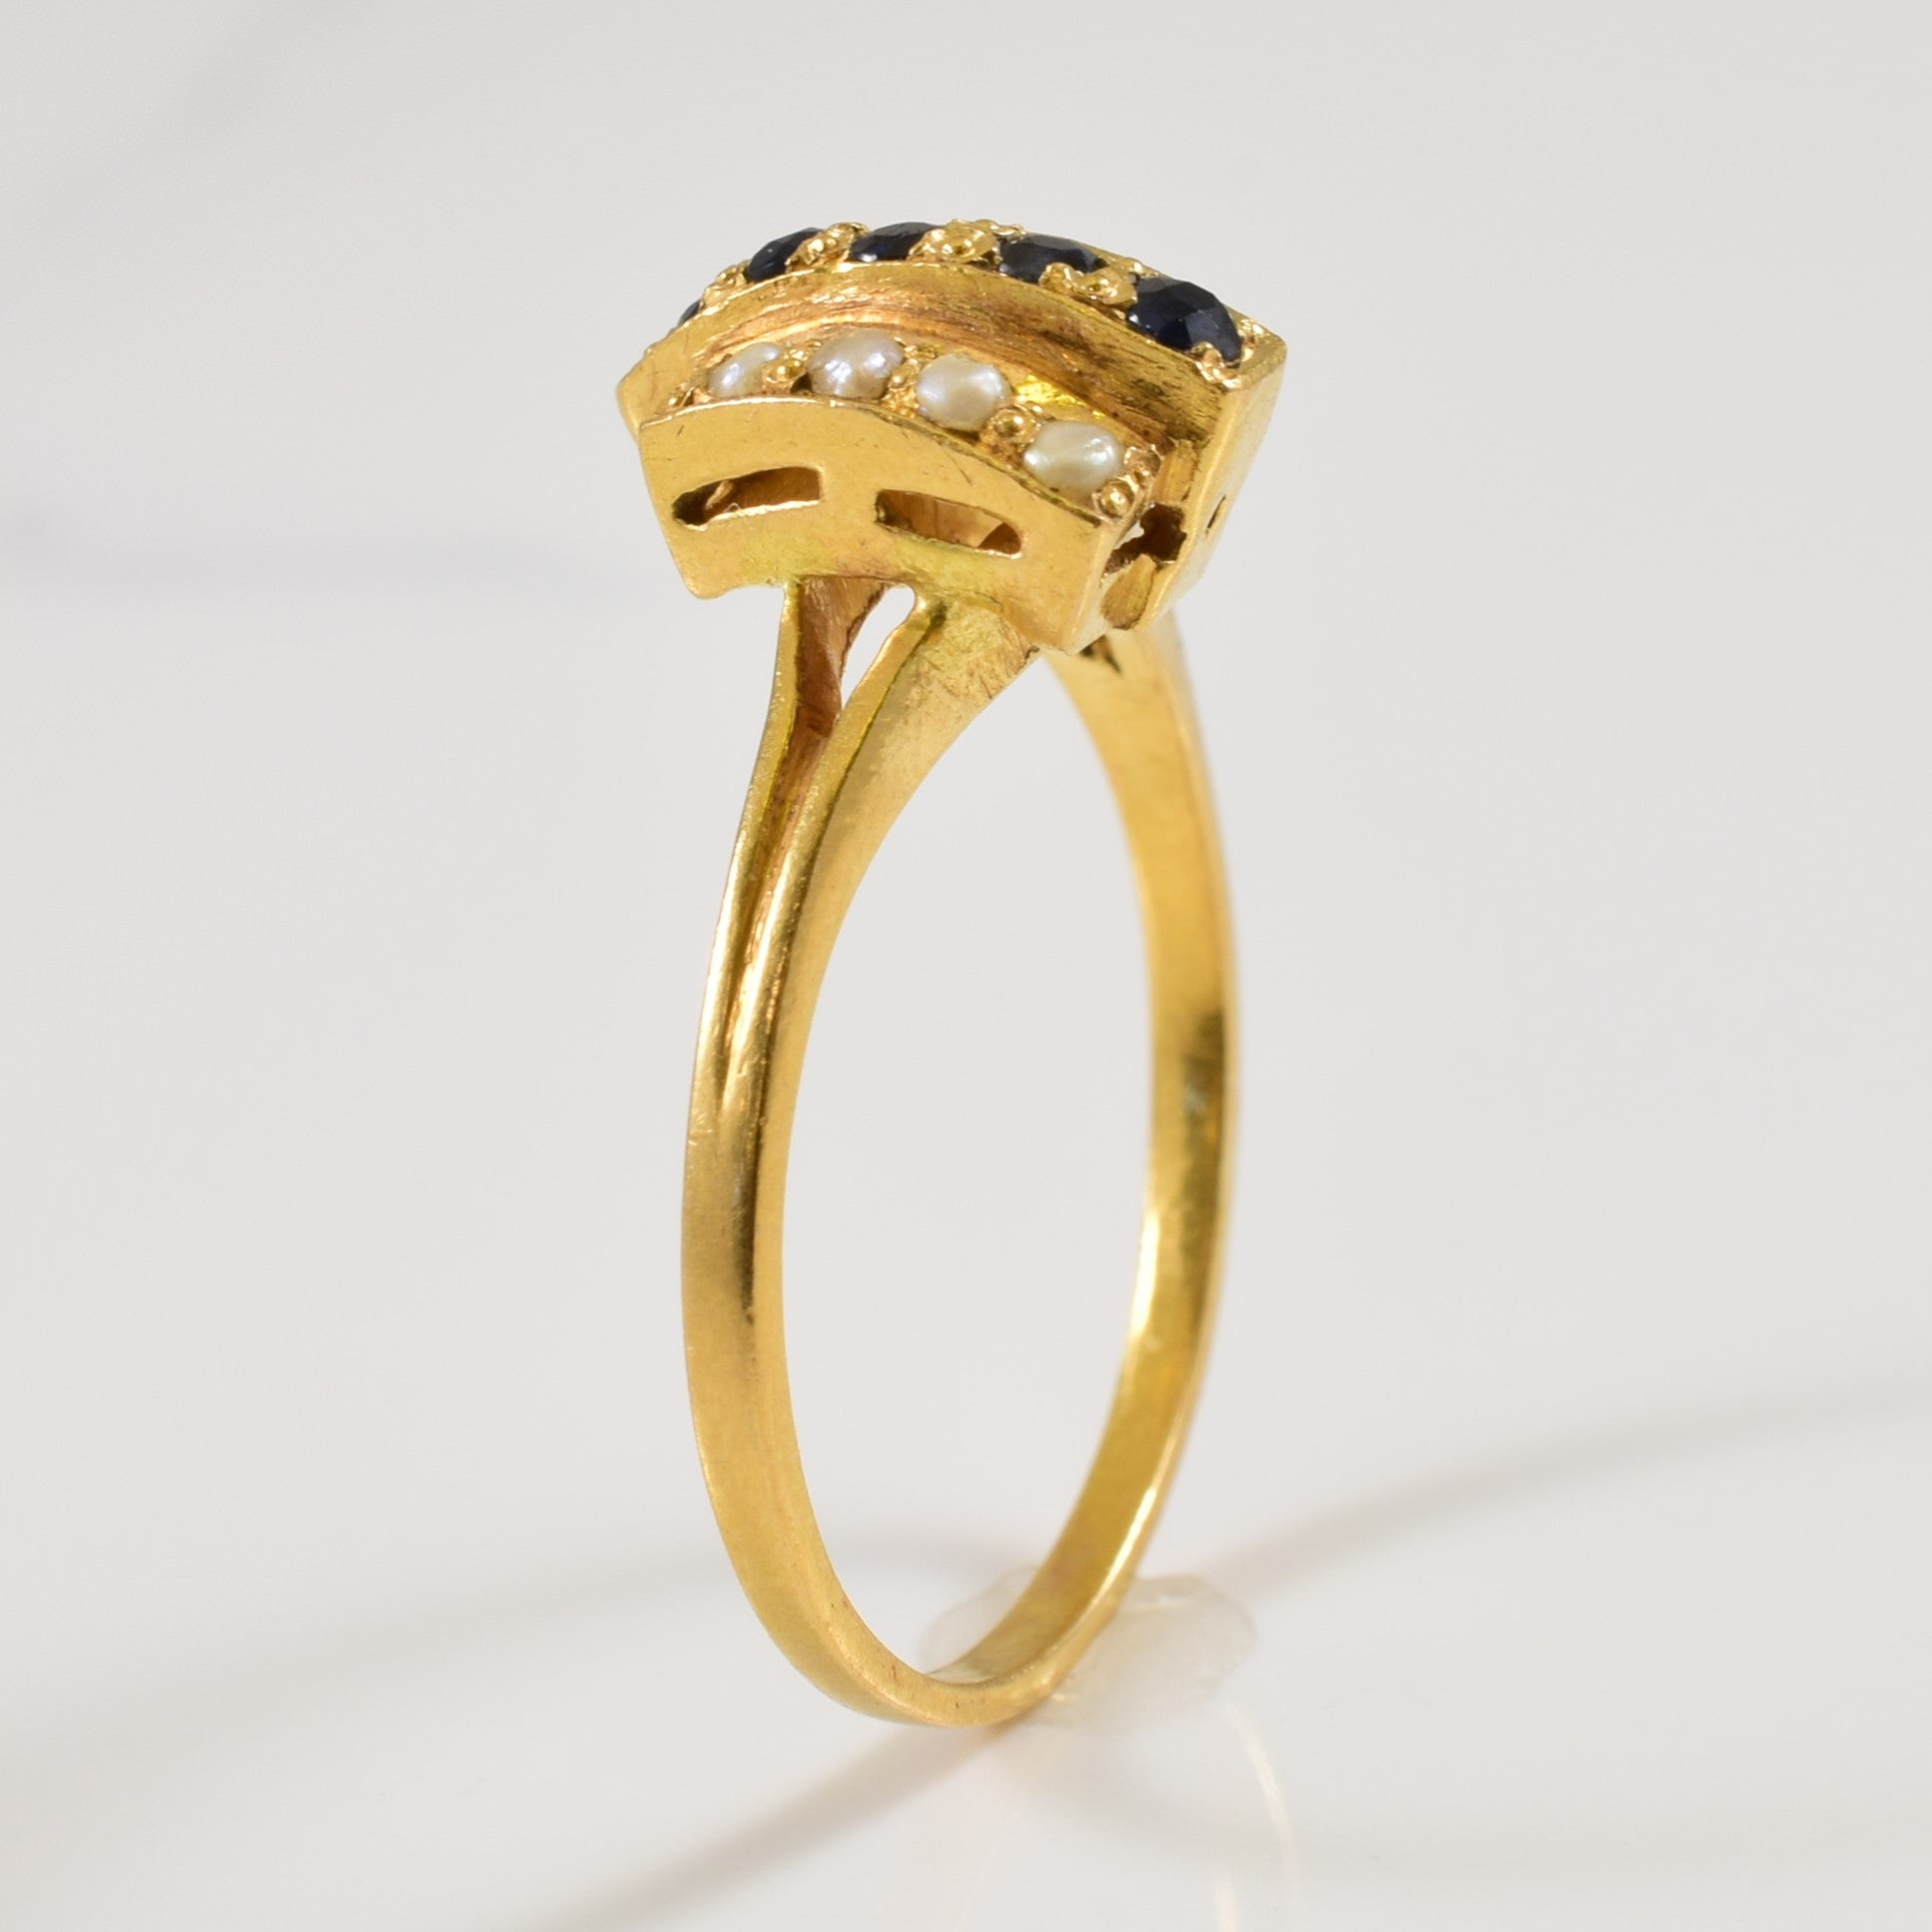 22k Sapphire & Seed Pearl Ring| 0.25ctw | SZ 6.75 |